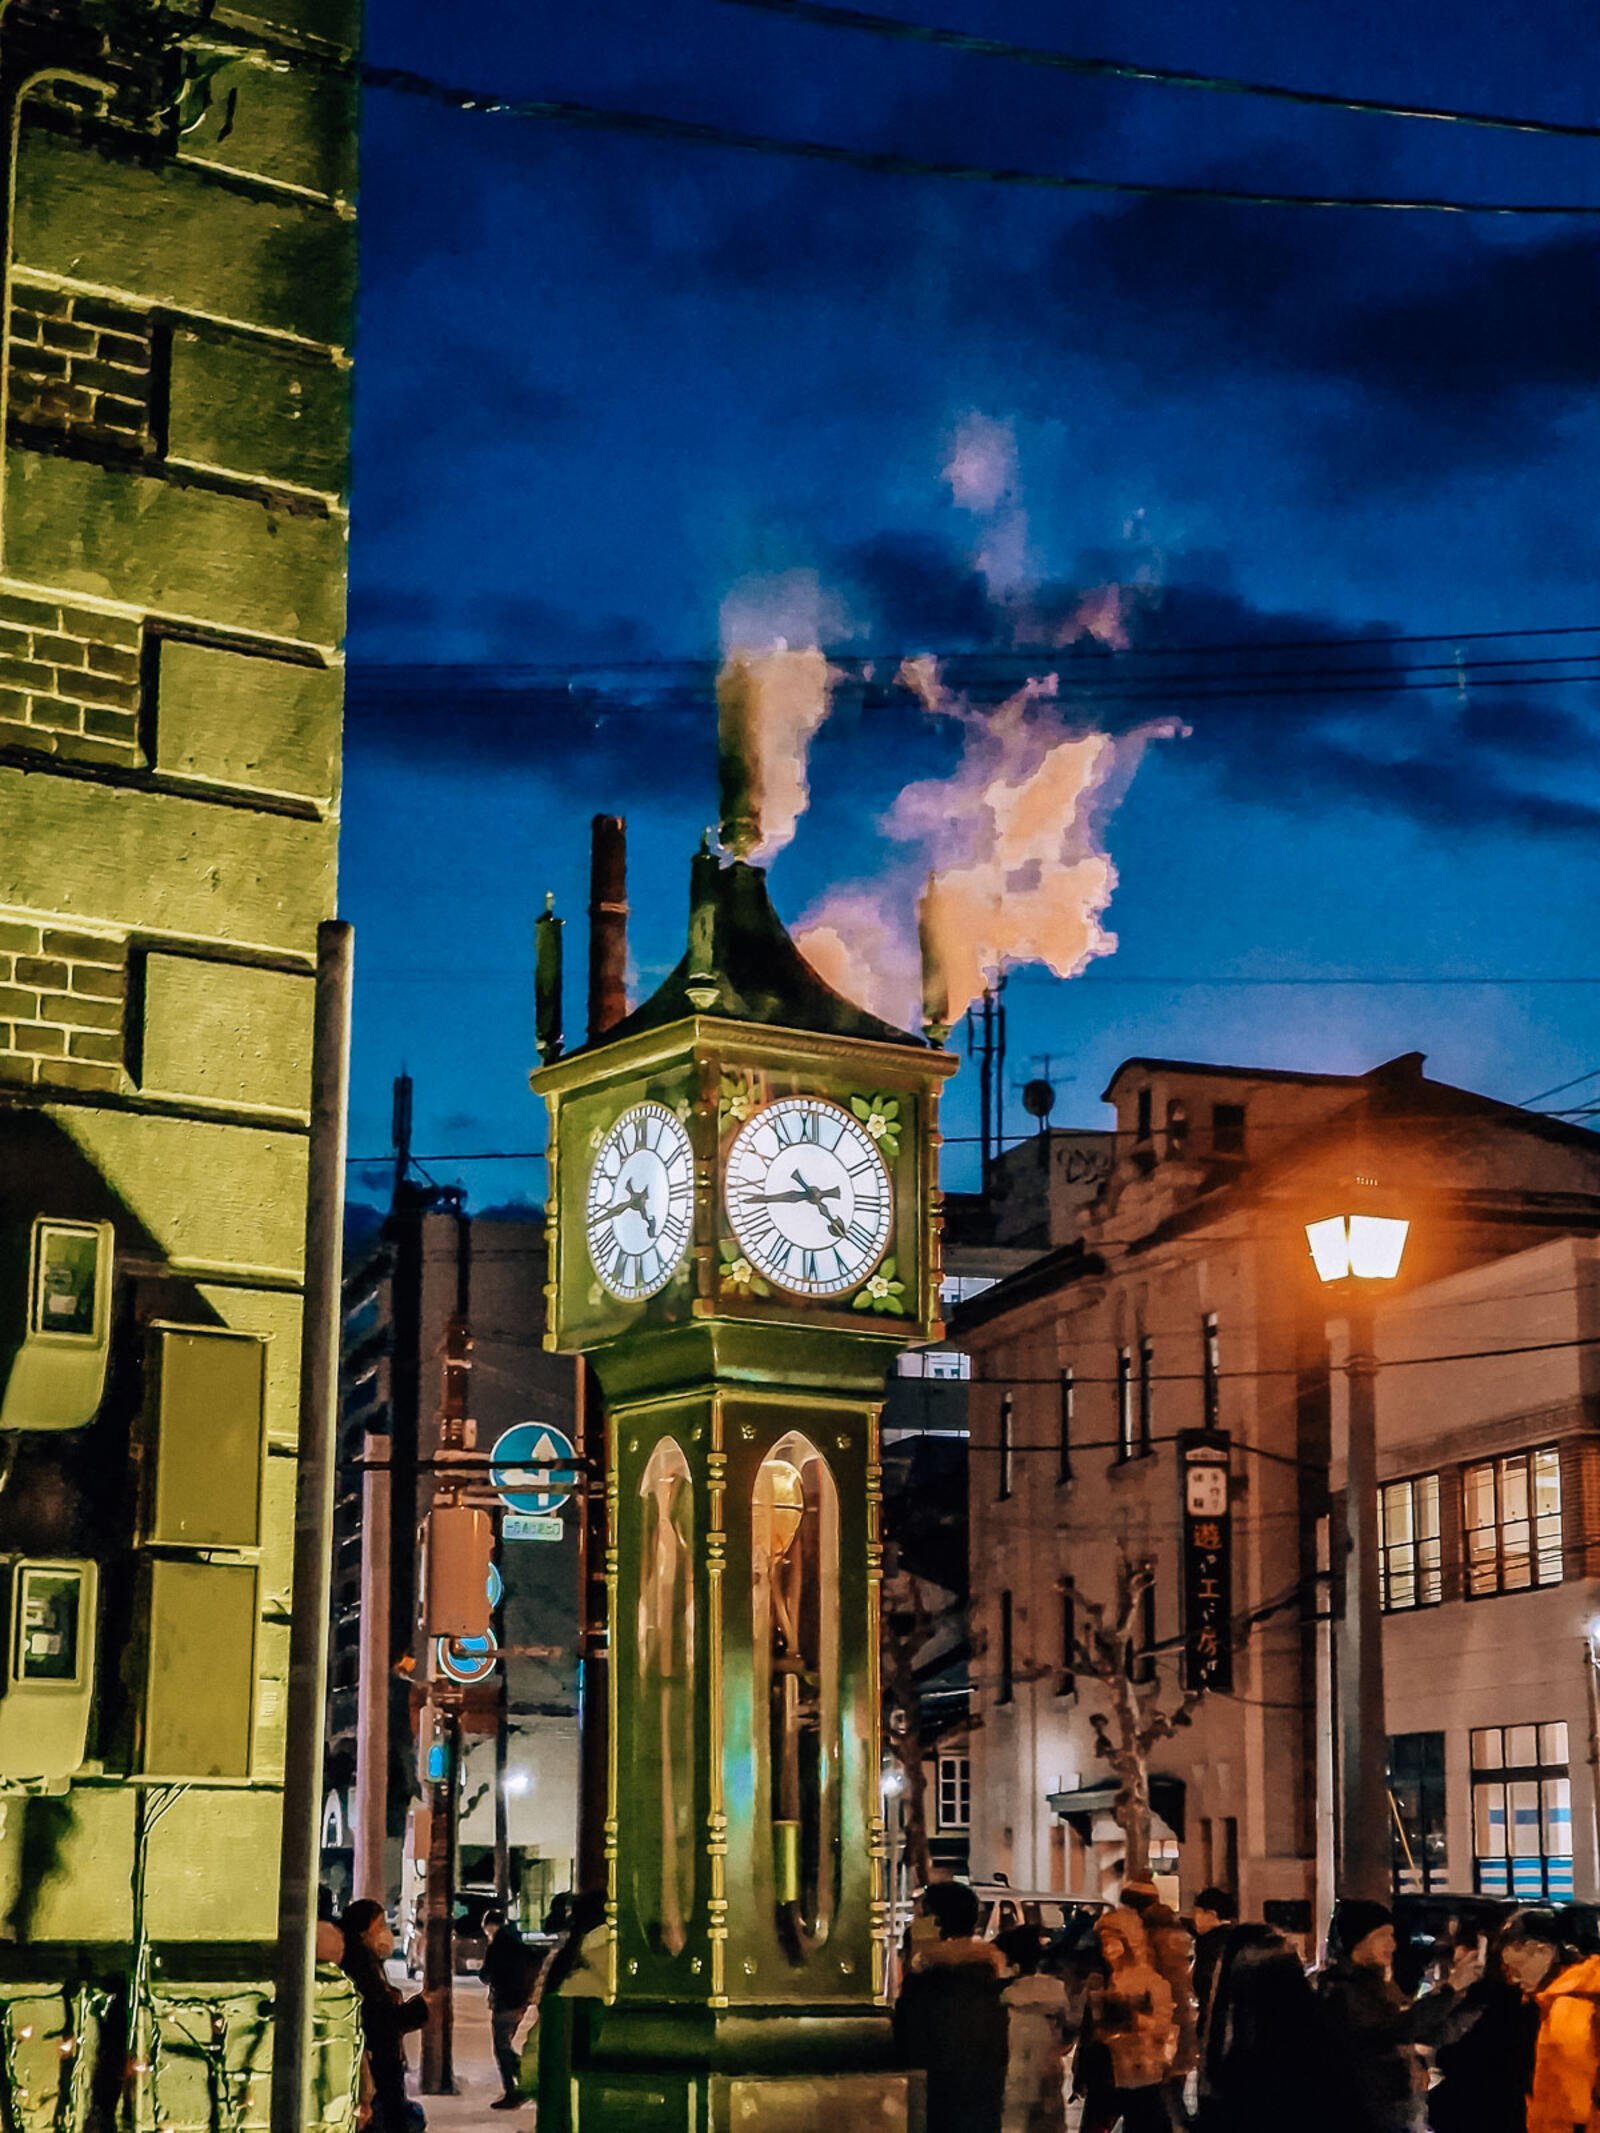 a 4-face grandfather clock which is a steam clock, steam coming out the top visible against the dark blue night sky